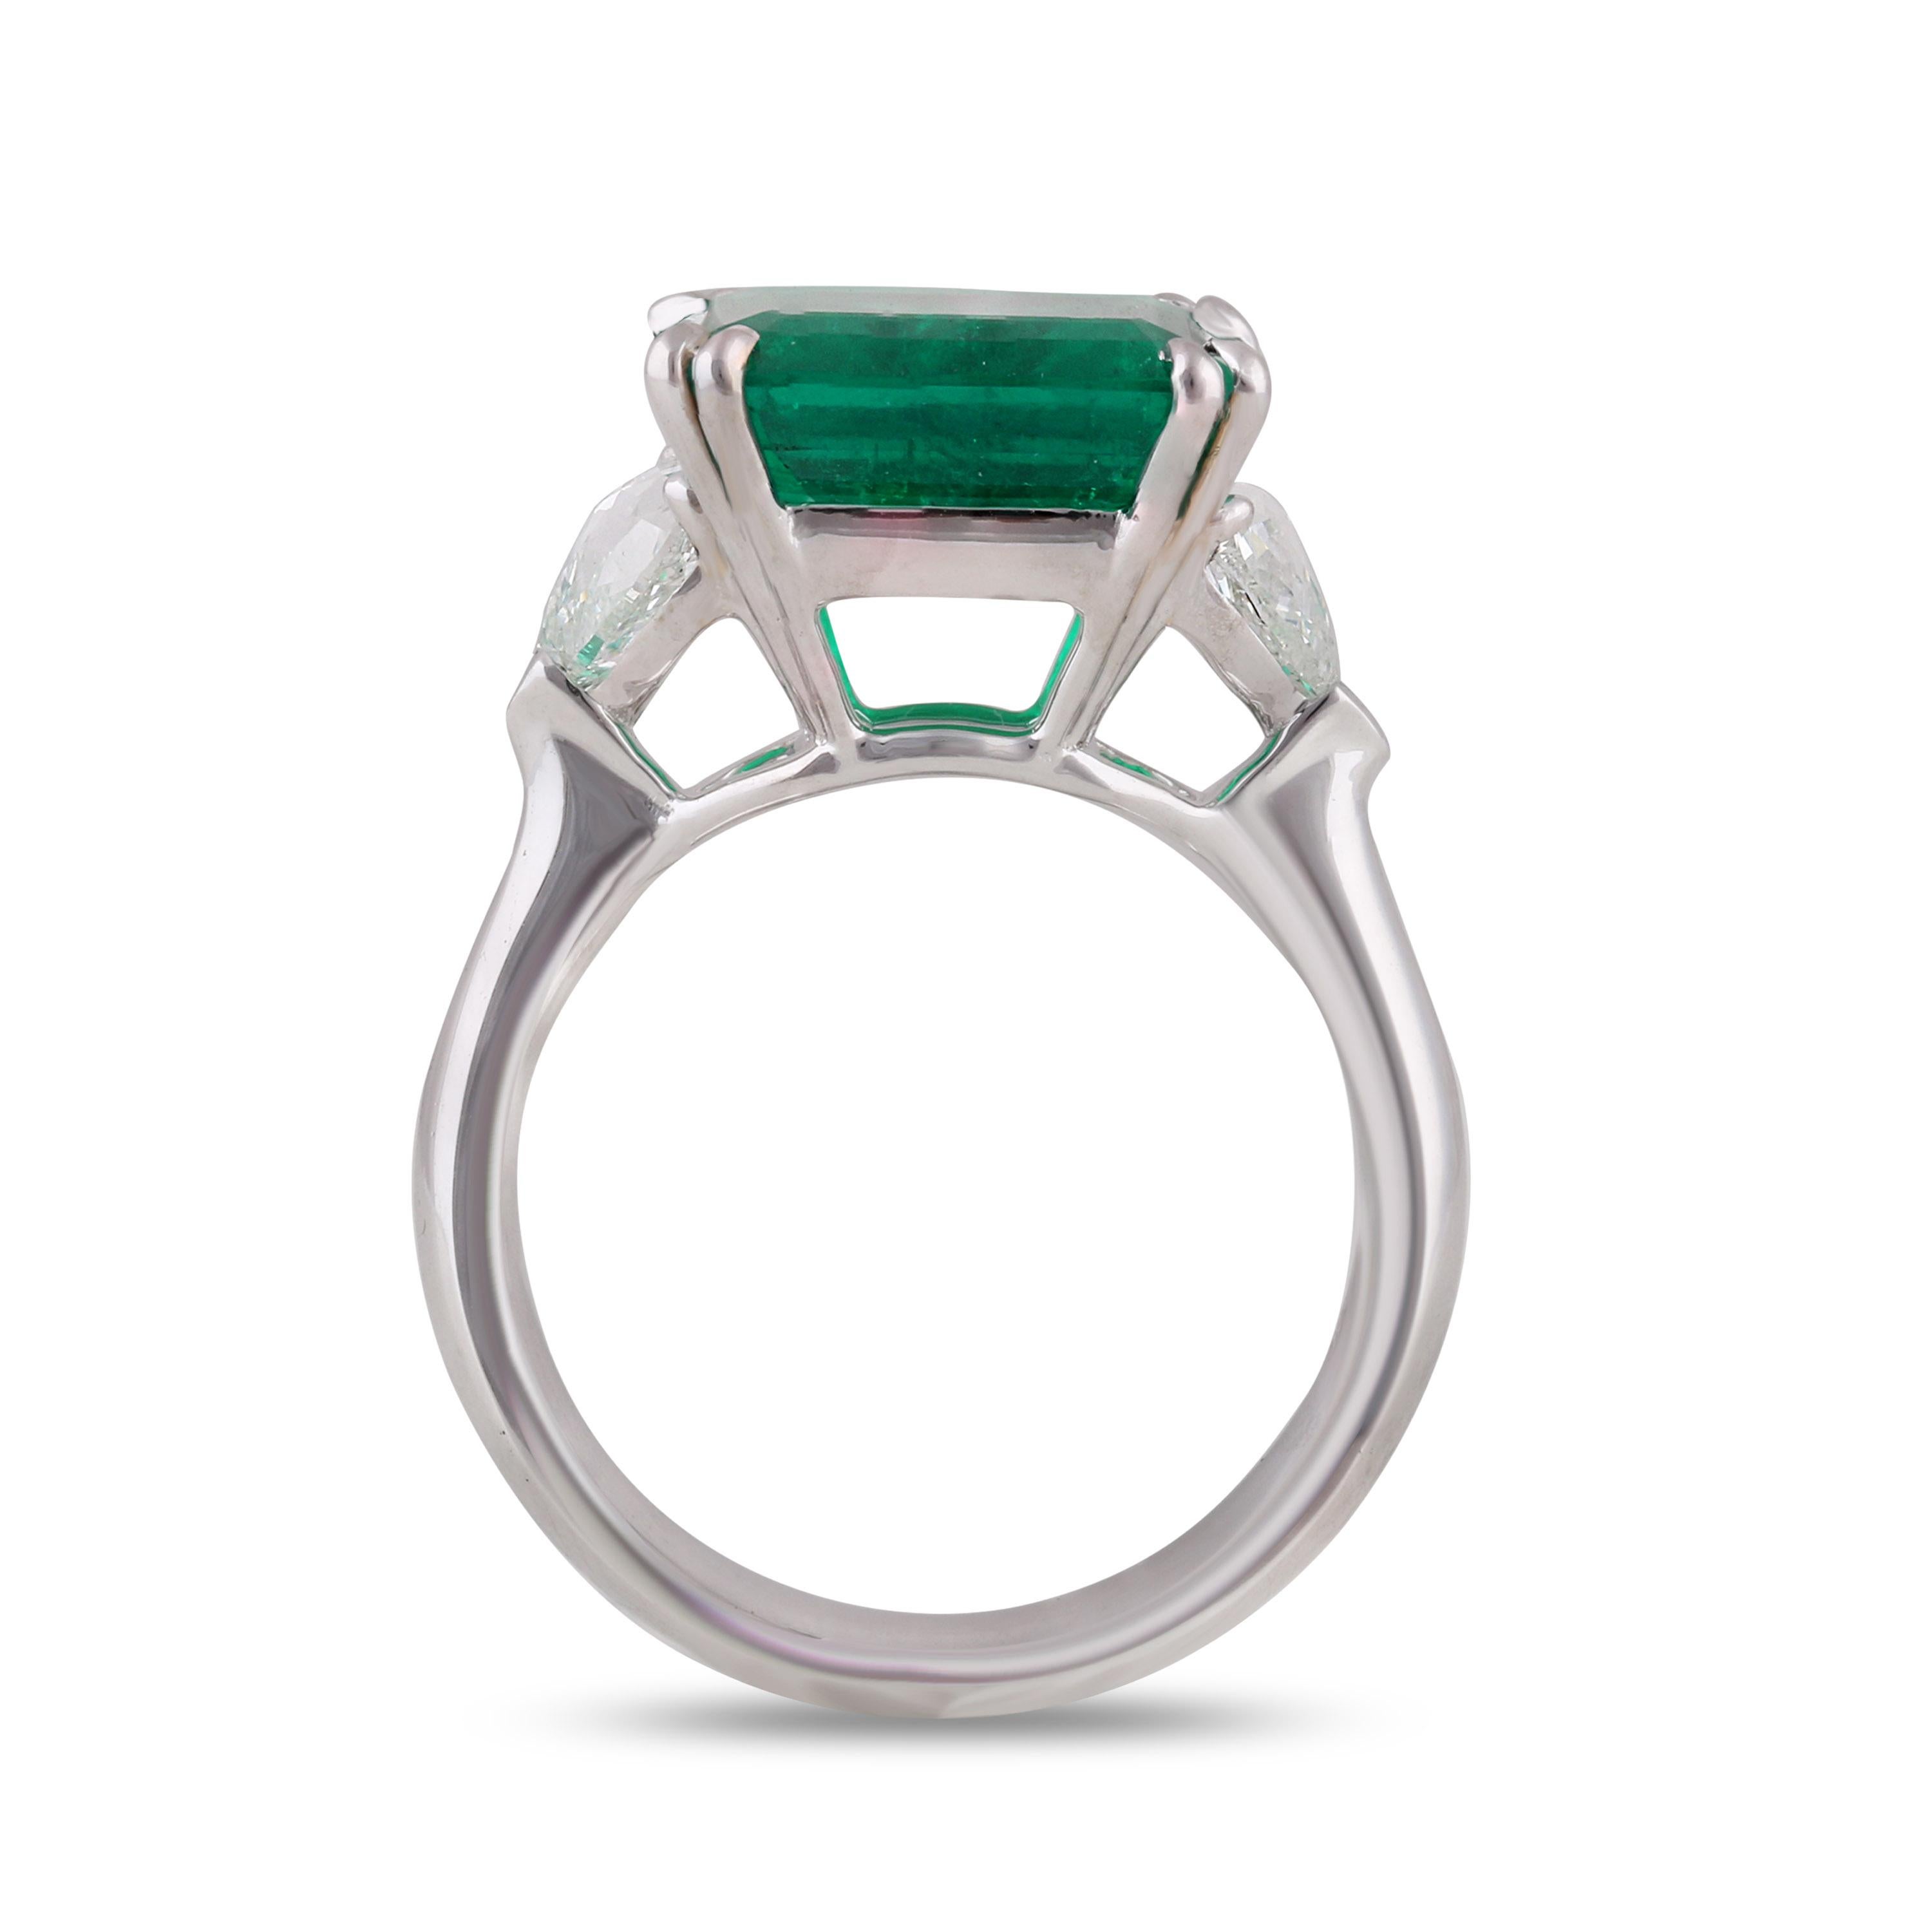 Studio Rêves 5.51 Carat Emerald and Trillion Rose Cut Diamond Ring in 18K Gold For Sale 2